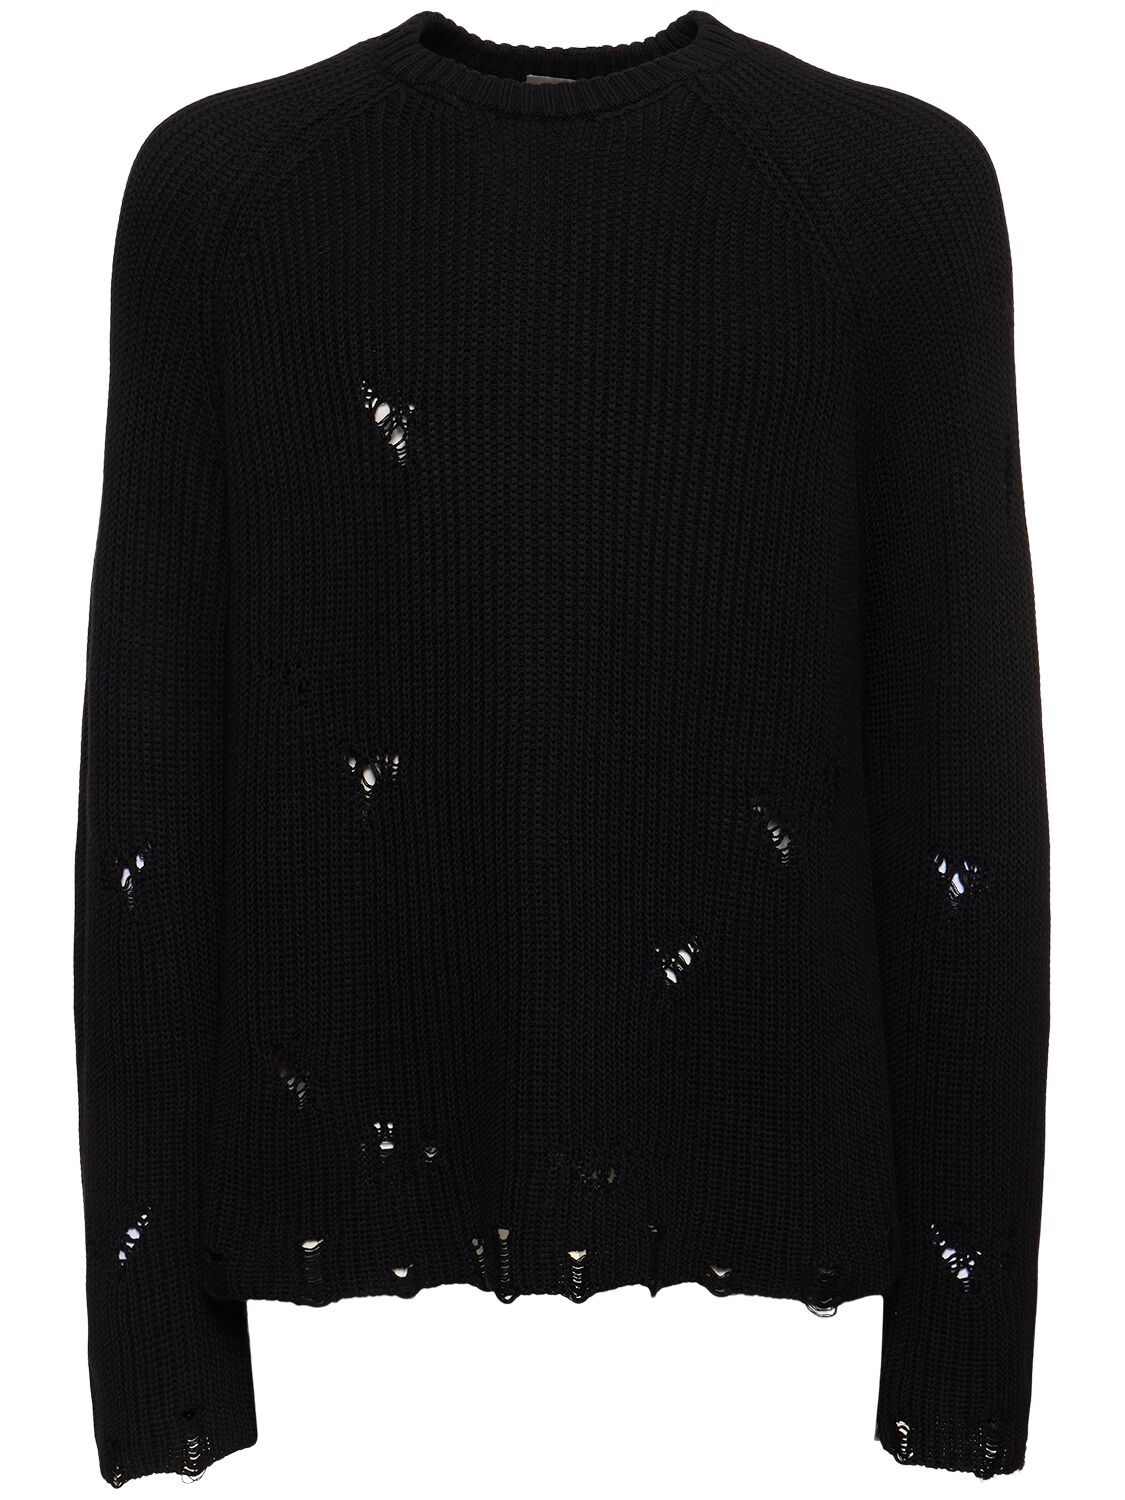 Unisex Knitted Sweater W/ Holes